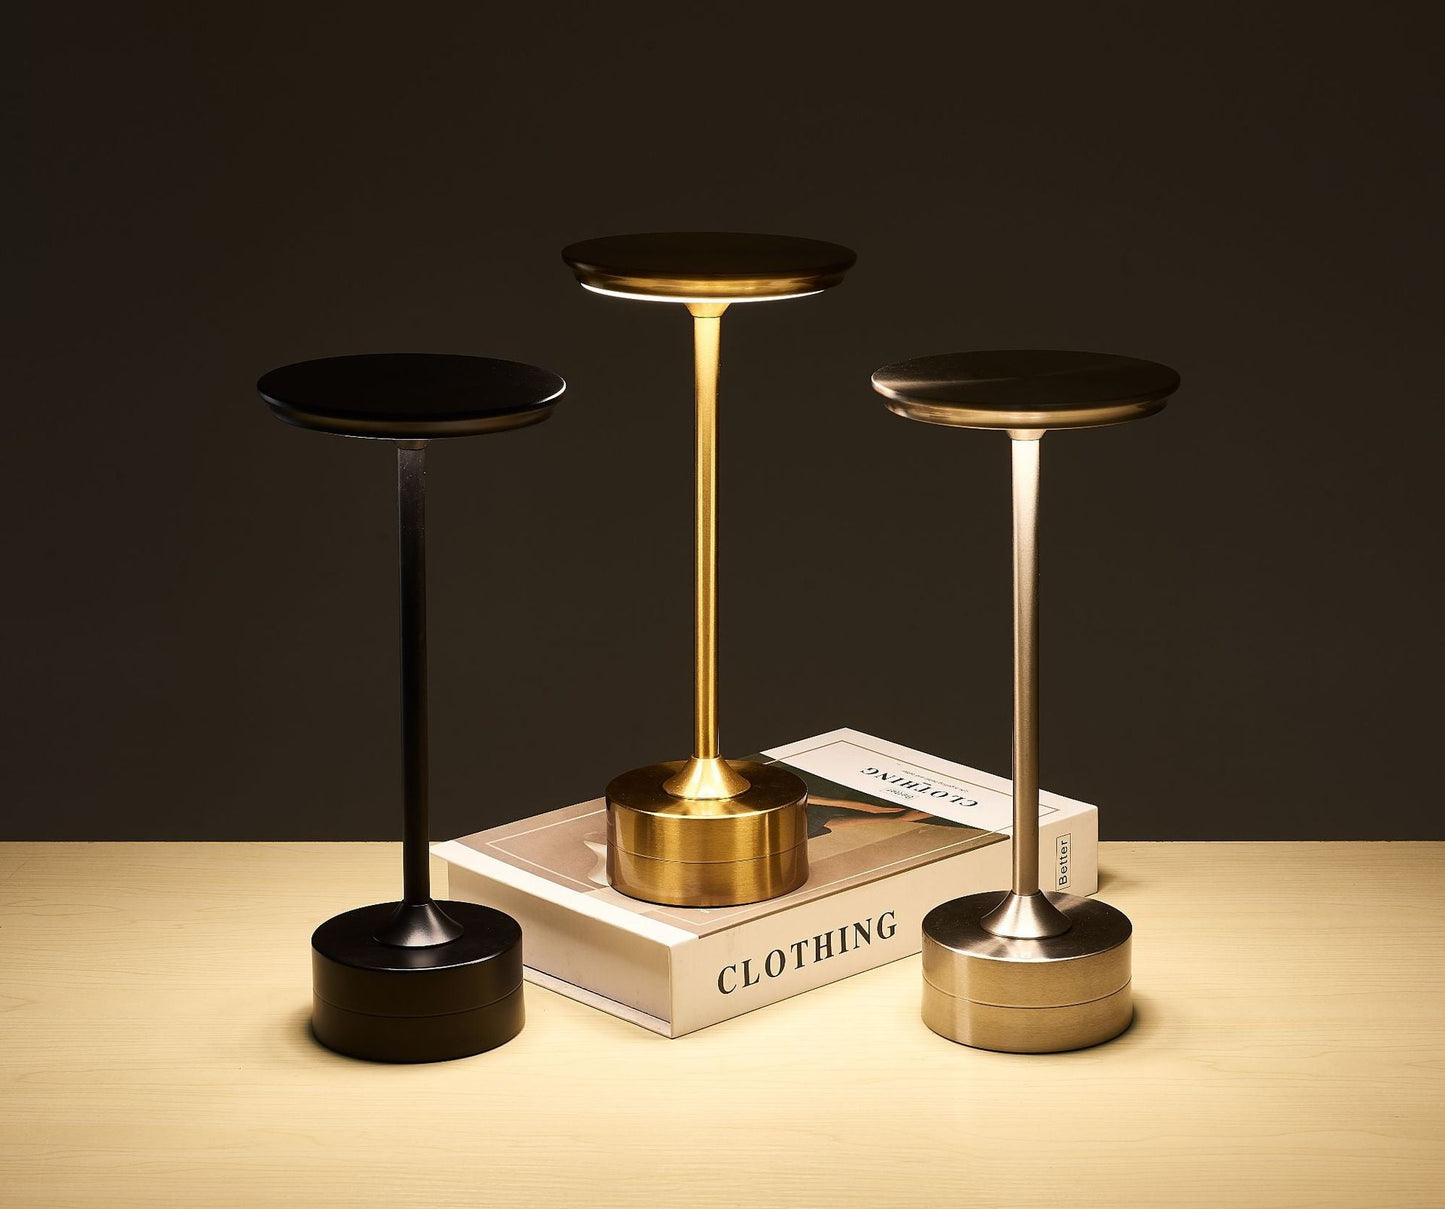 Rechargeable wireless LED table lamp: valuable and functional lighting